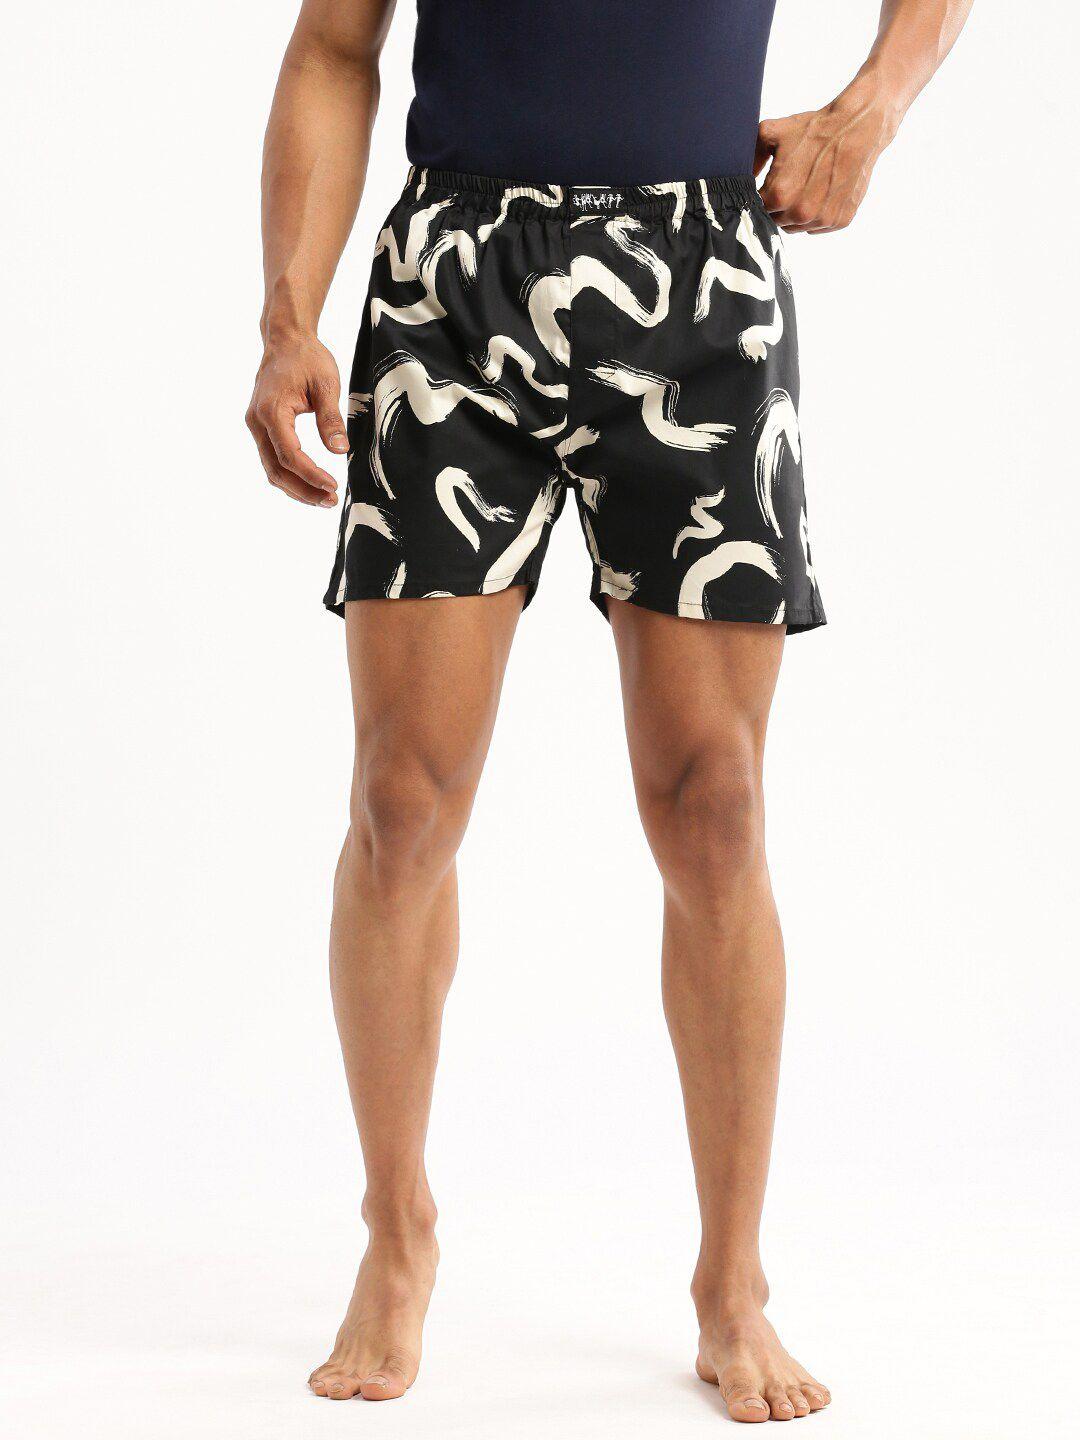 showoff slim fit abstract printed cotton boxer am-131-8_black